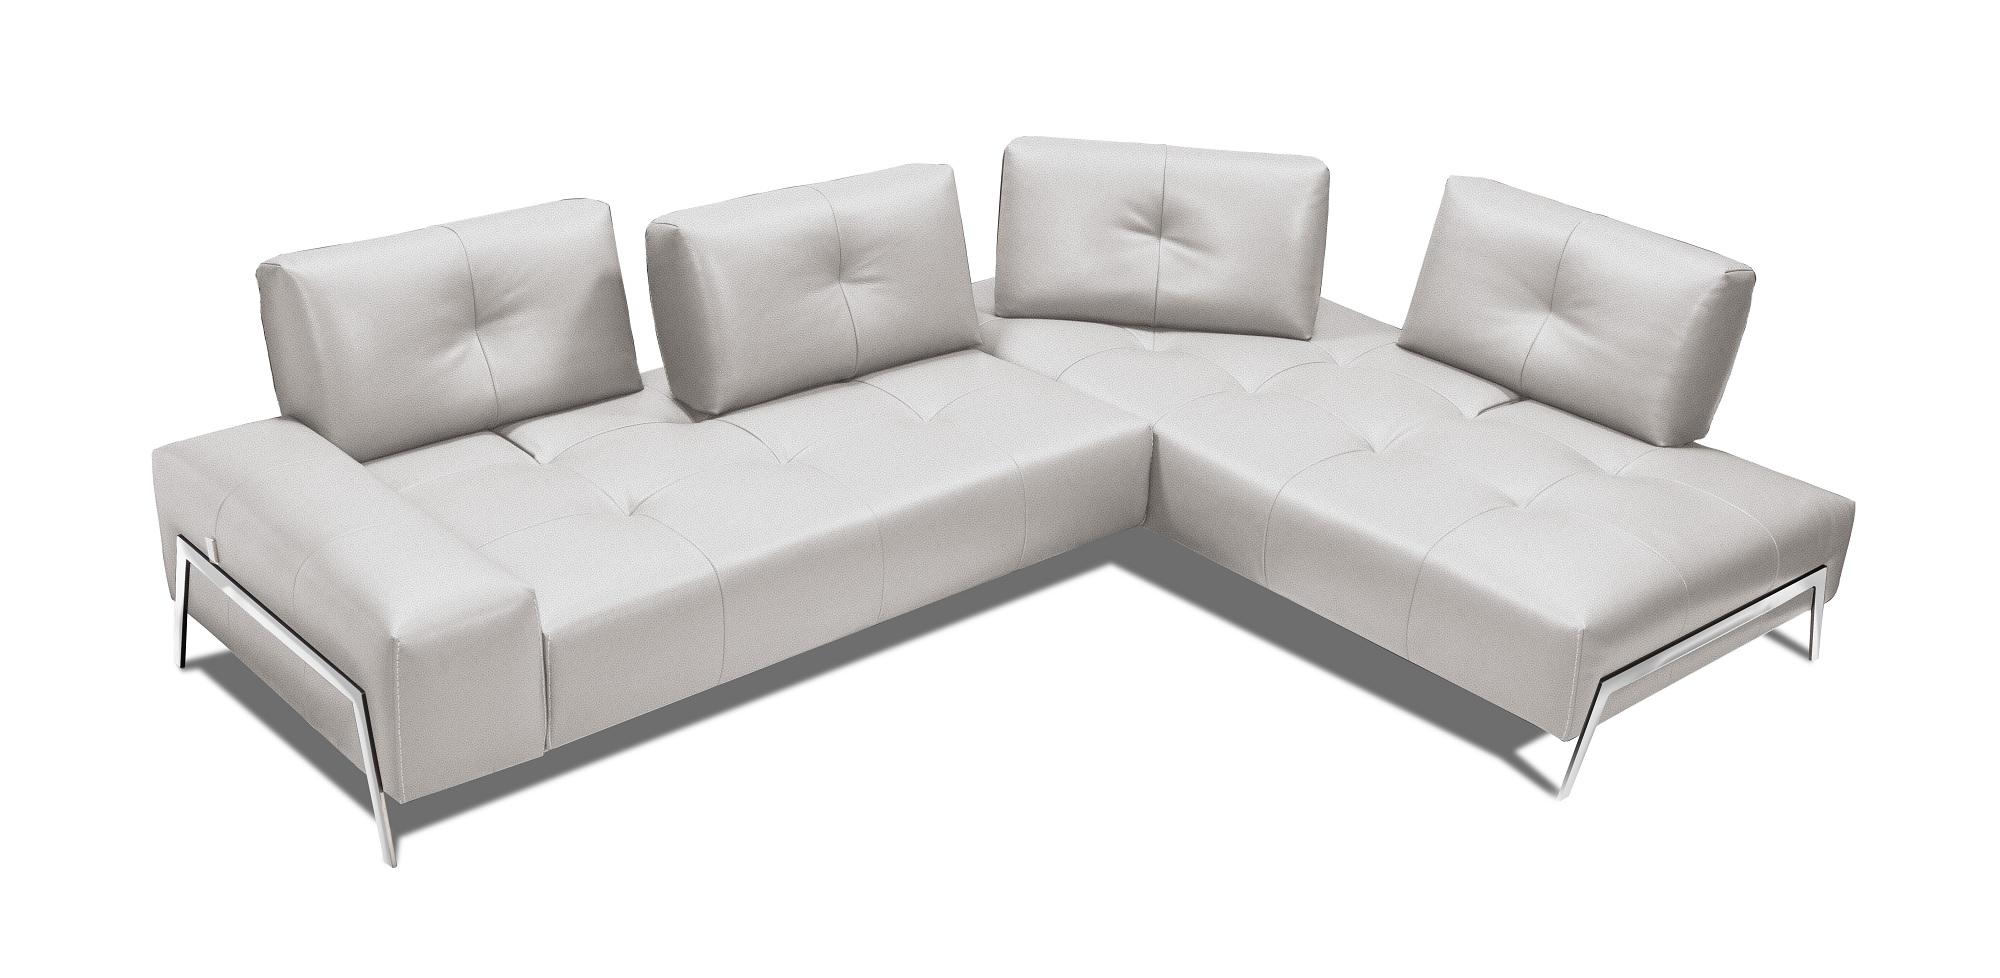 Modern Sectional Sofa I763 SKU 17477 in Gray Leather